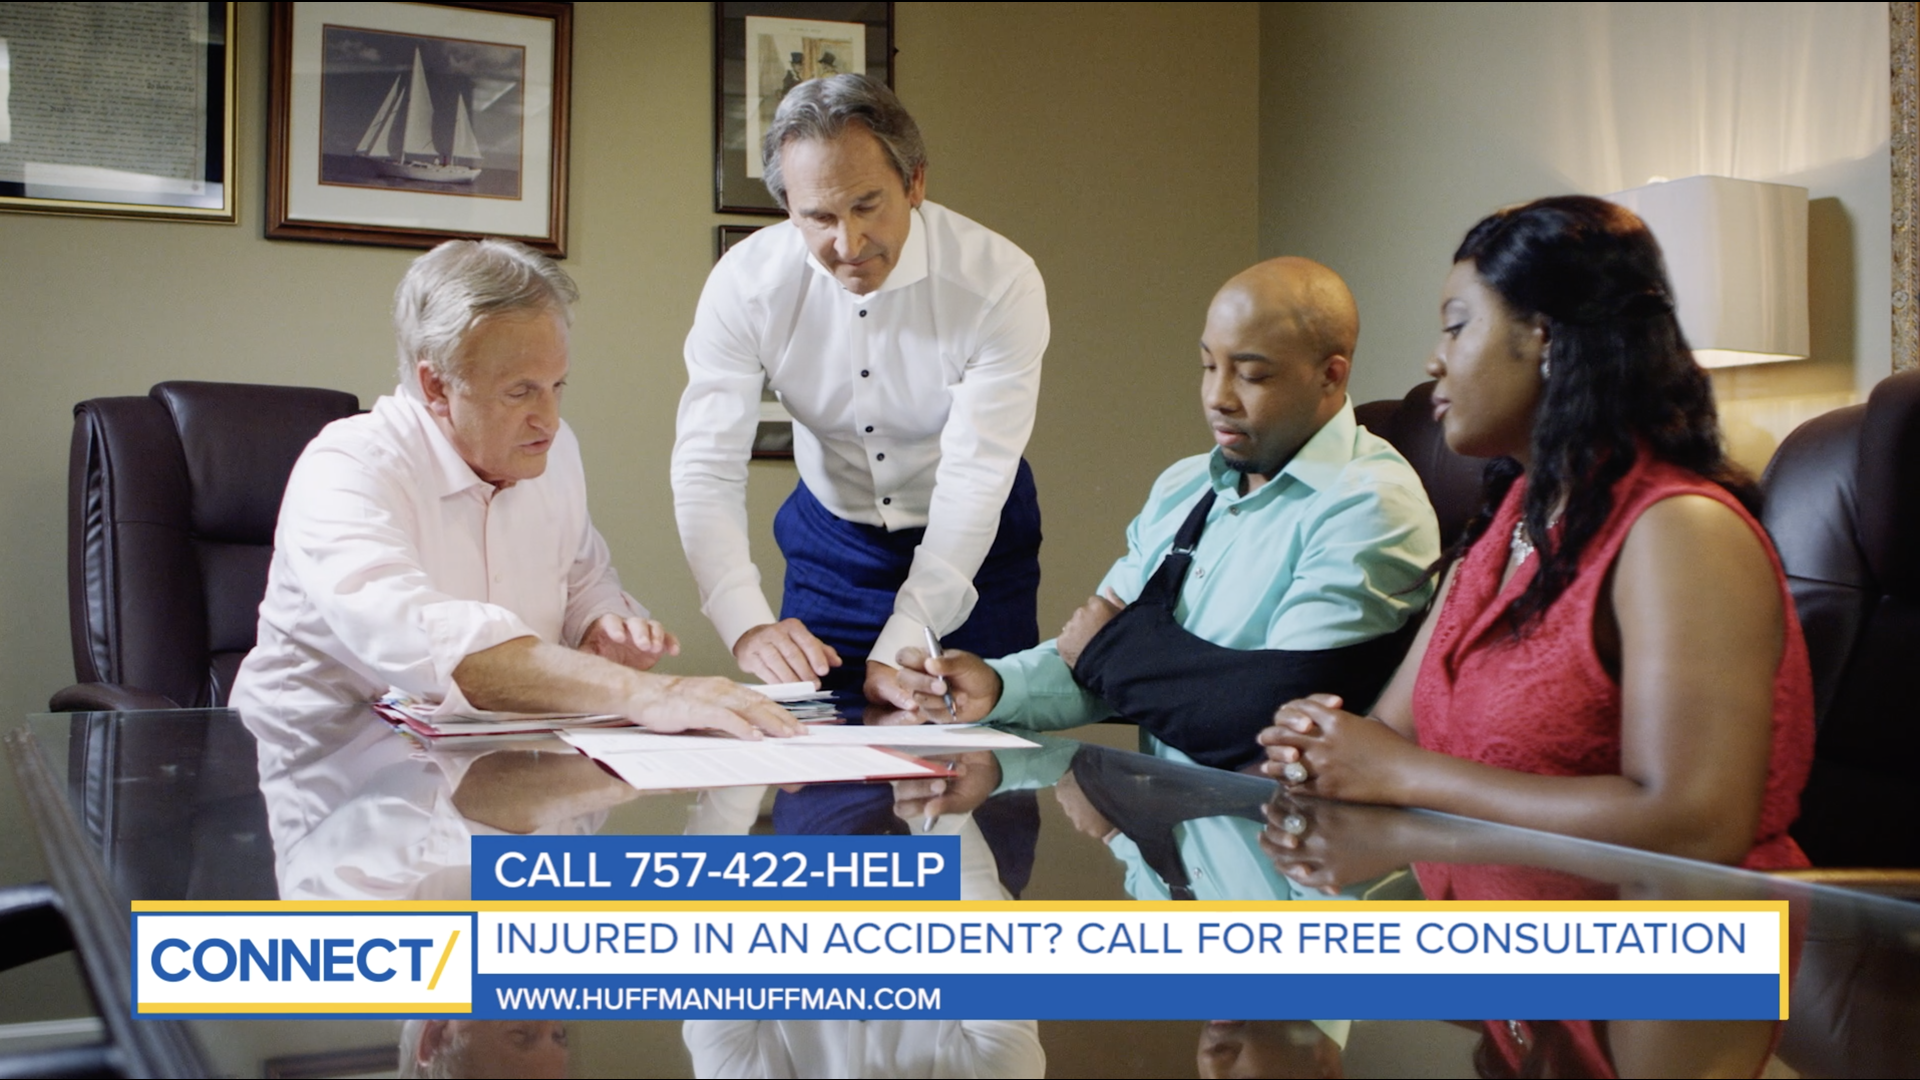 Brad Huffman shares why you should call an attorney before calling the insurance company if you've been injured in an accident.